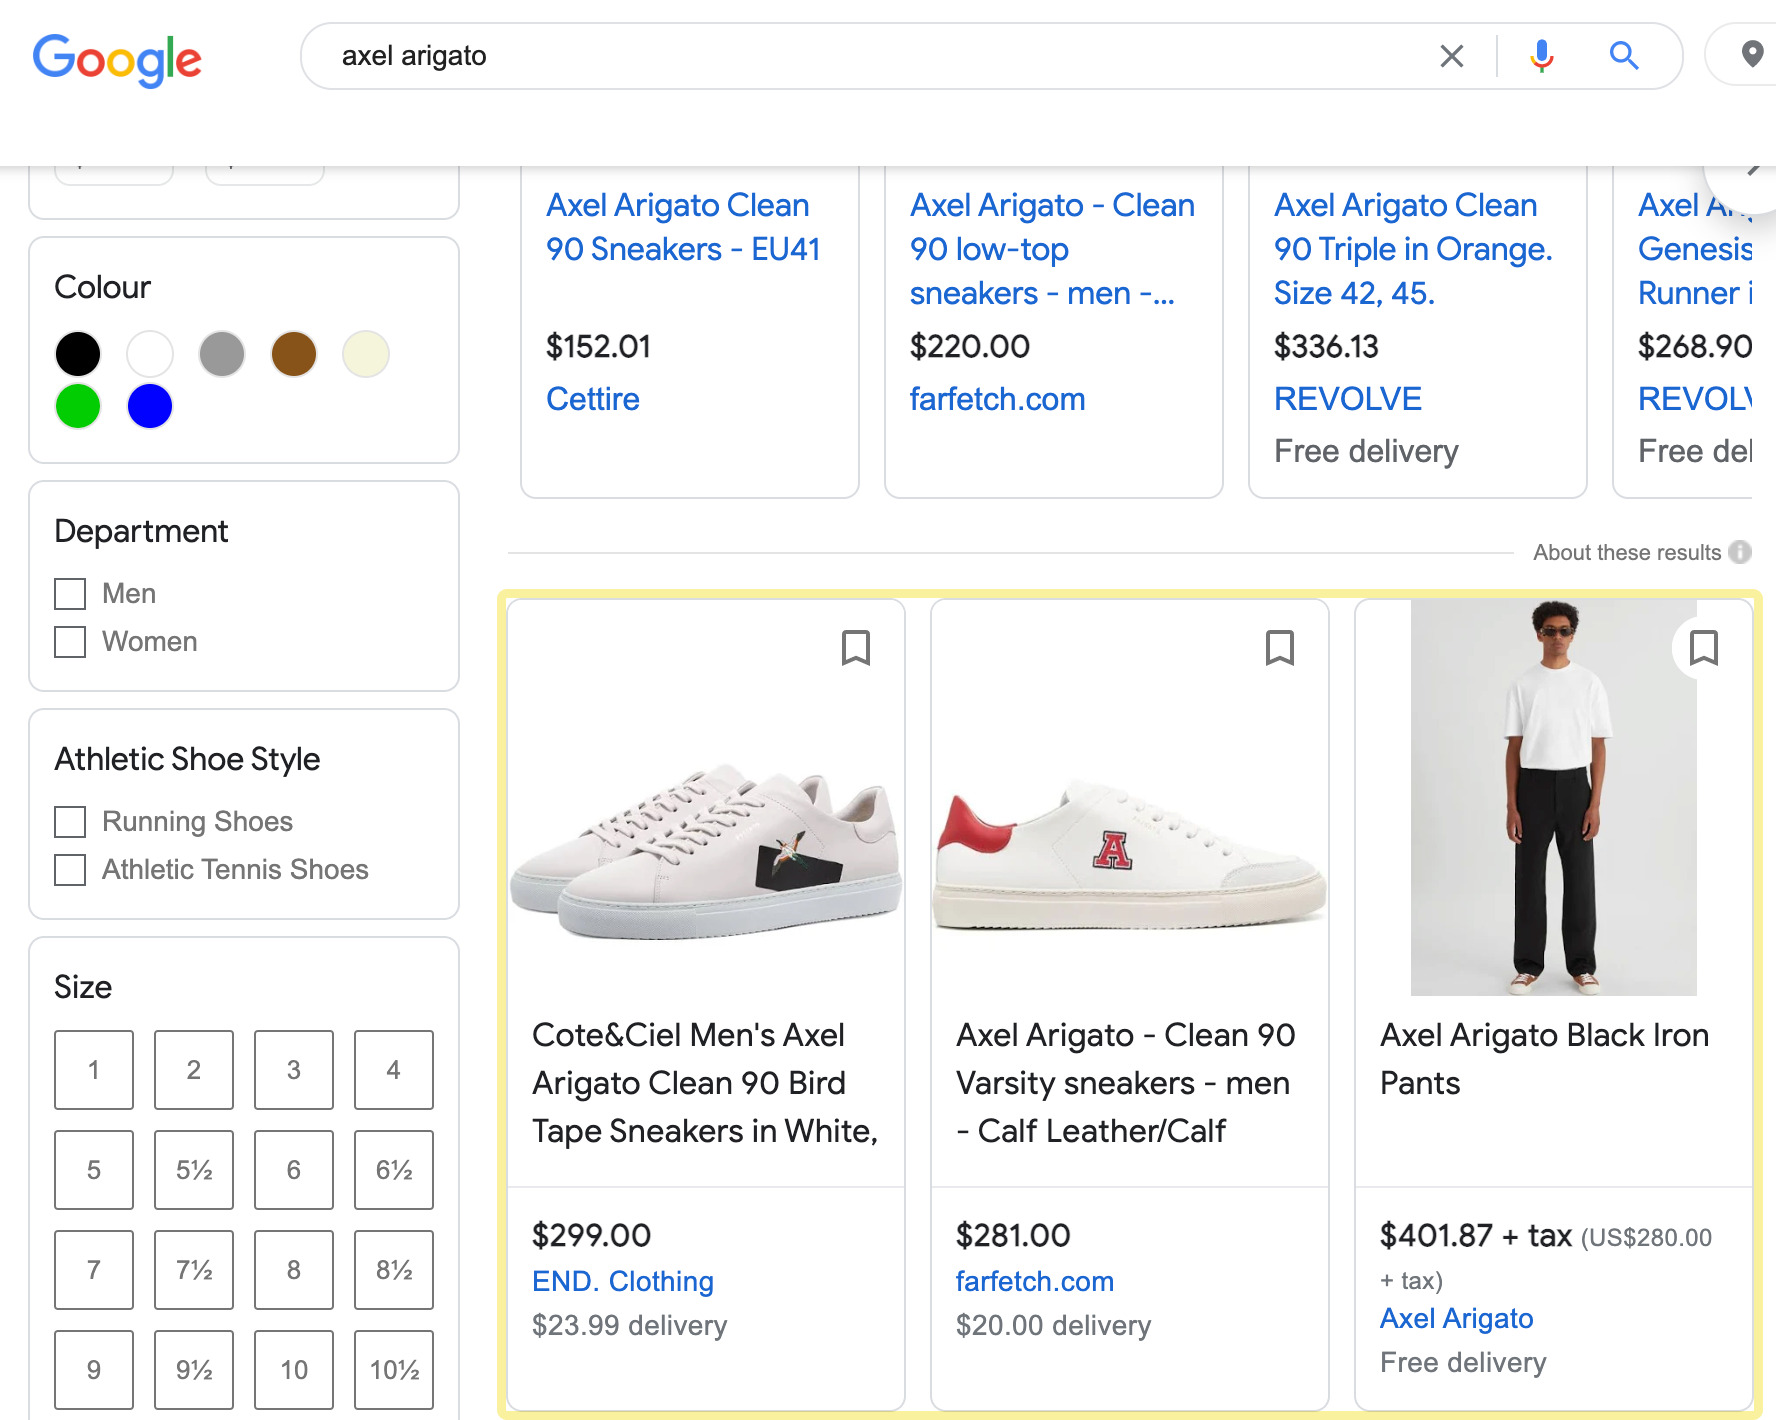 The organic Google Shopping results for the query, "Axel Arigato"